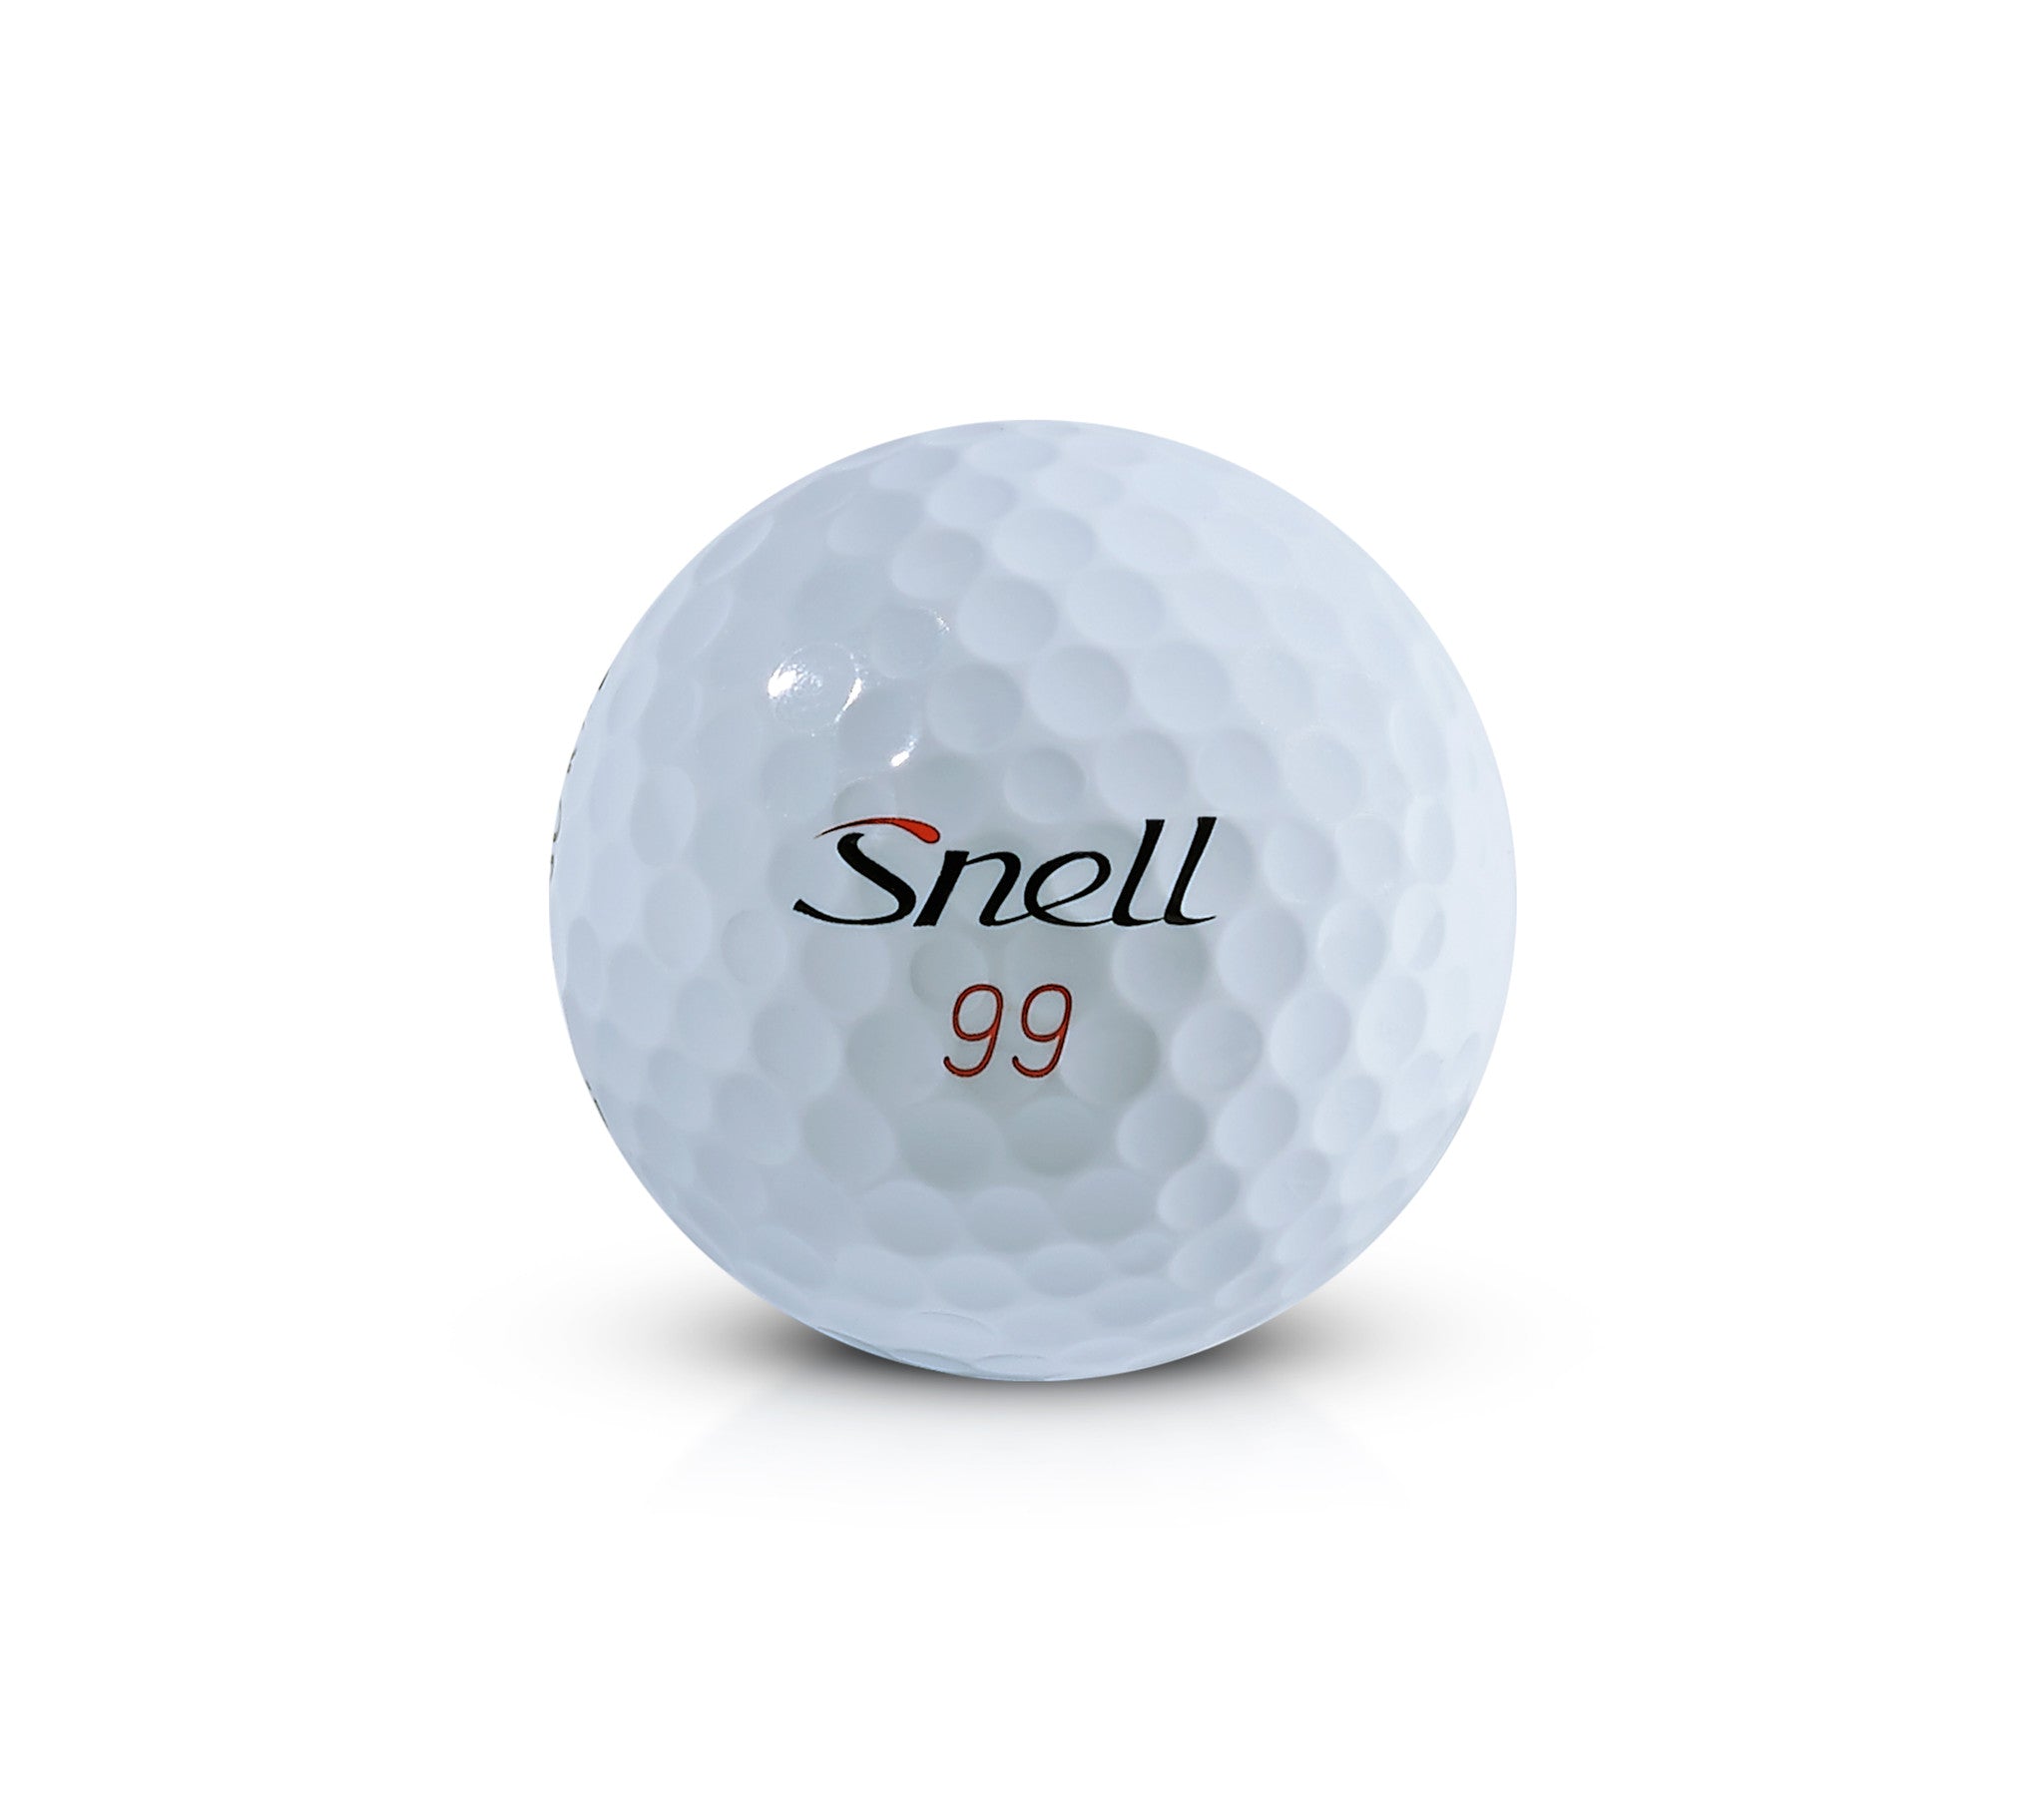 Why are the numbers on golf balls red and black? - Snell Golf